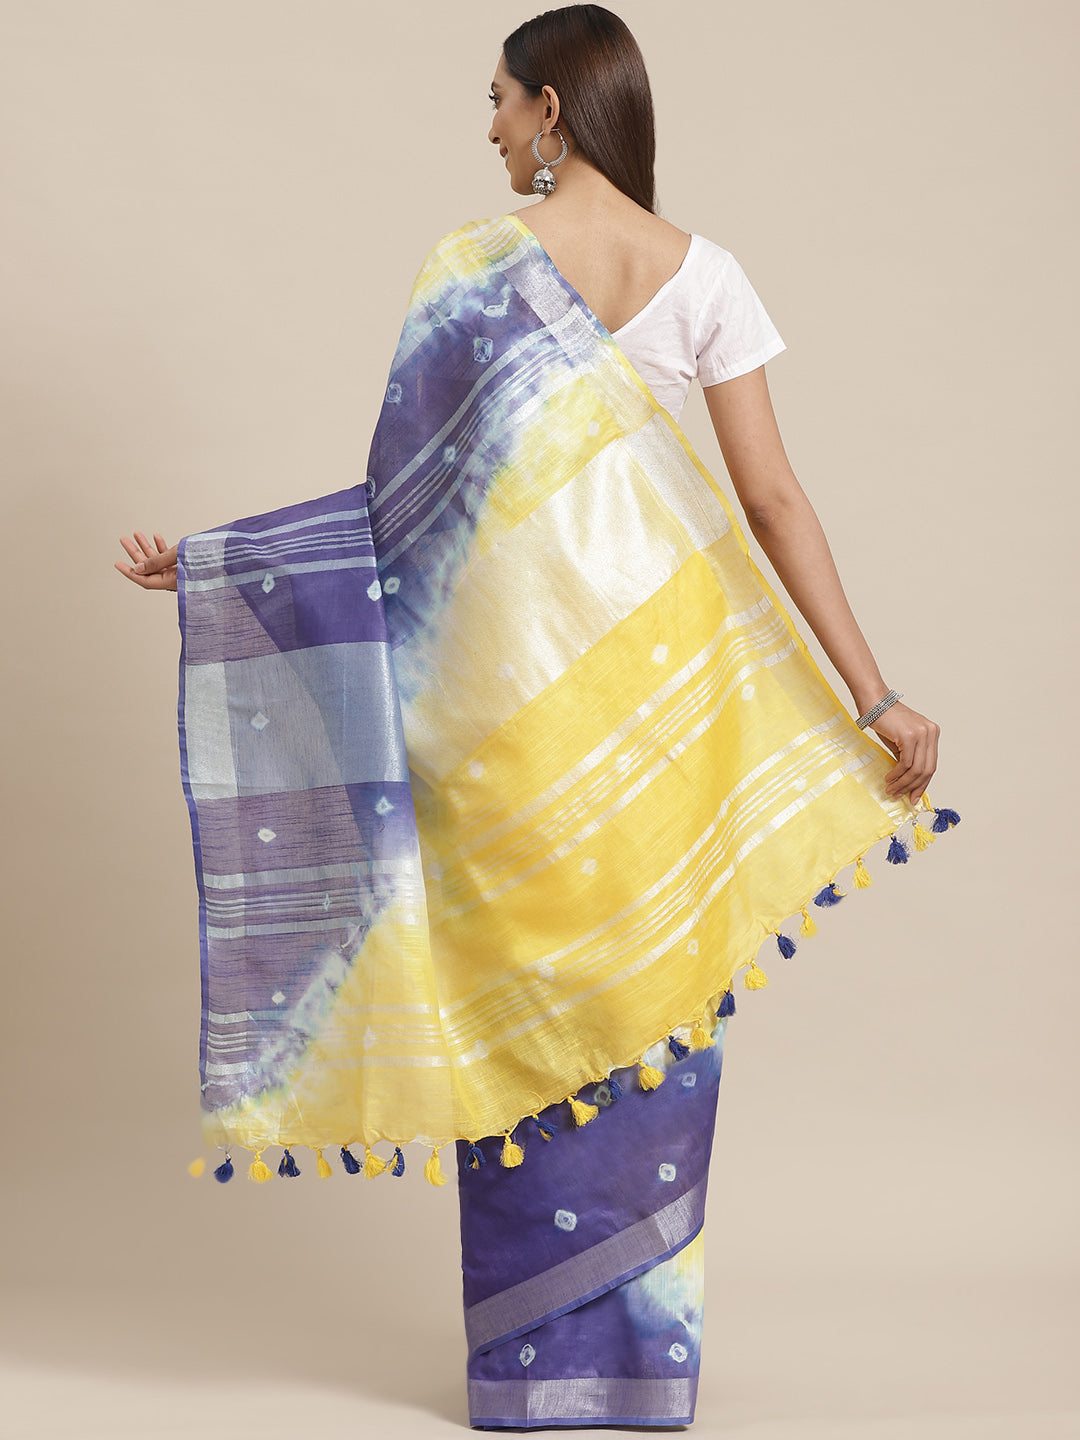 Yellow and Blue, Kalakari India Linen Shibori Woven Saree and Blouse ALBGSA0062-Saree-Kalakari India-ALBGSA0062-Cotton, Geographical Indication, Hand Crafted, Heritage Prints, Linen, Natural Dyes, Red, Sarees, Shibori, Sustainable Fabrics, Woven, Yellow-[Linen,Ethnic,wear,Fashionista,Handloom,Handicraft,Indigo,blockprint,block,print,Cotton,Chanderi,Blue, latest,classy,party,bollywood,trendy,summer,style,traditional,formal,elegant,unique,style,hand,block,print, dabu,booti,gift,present,glamorous,a